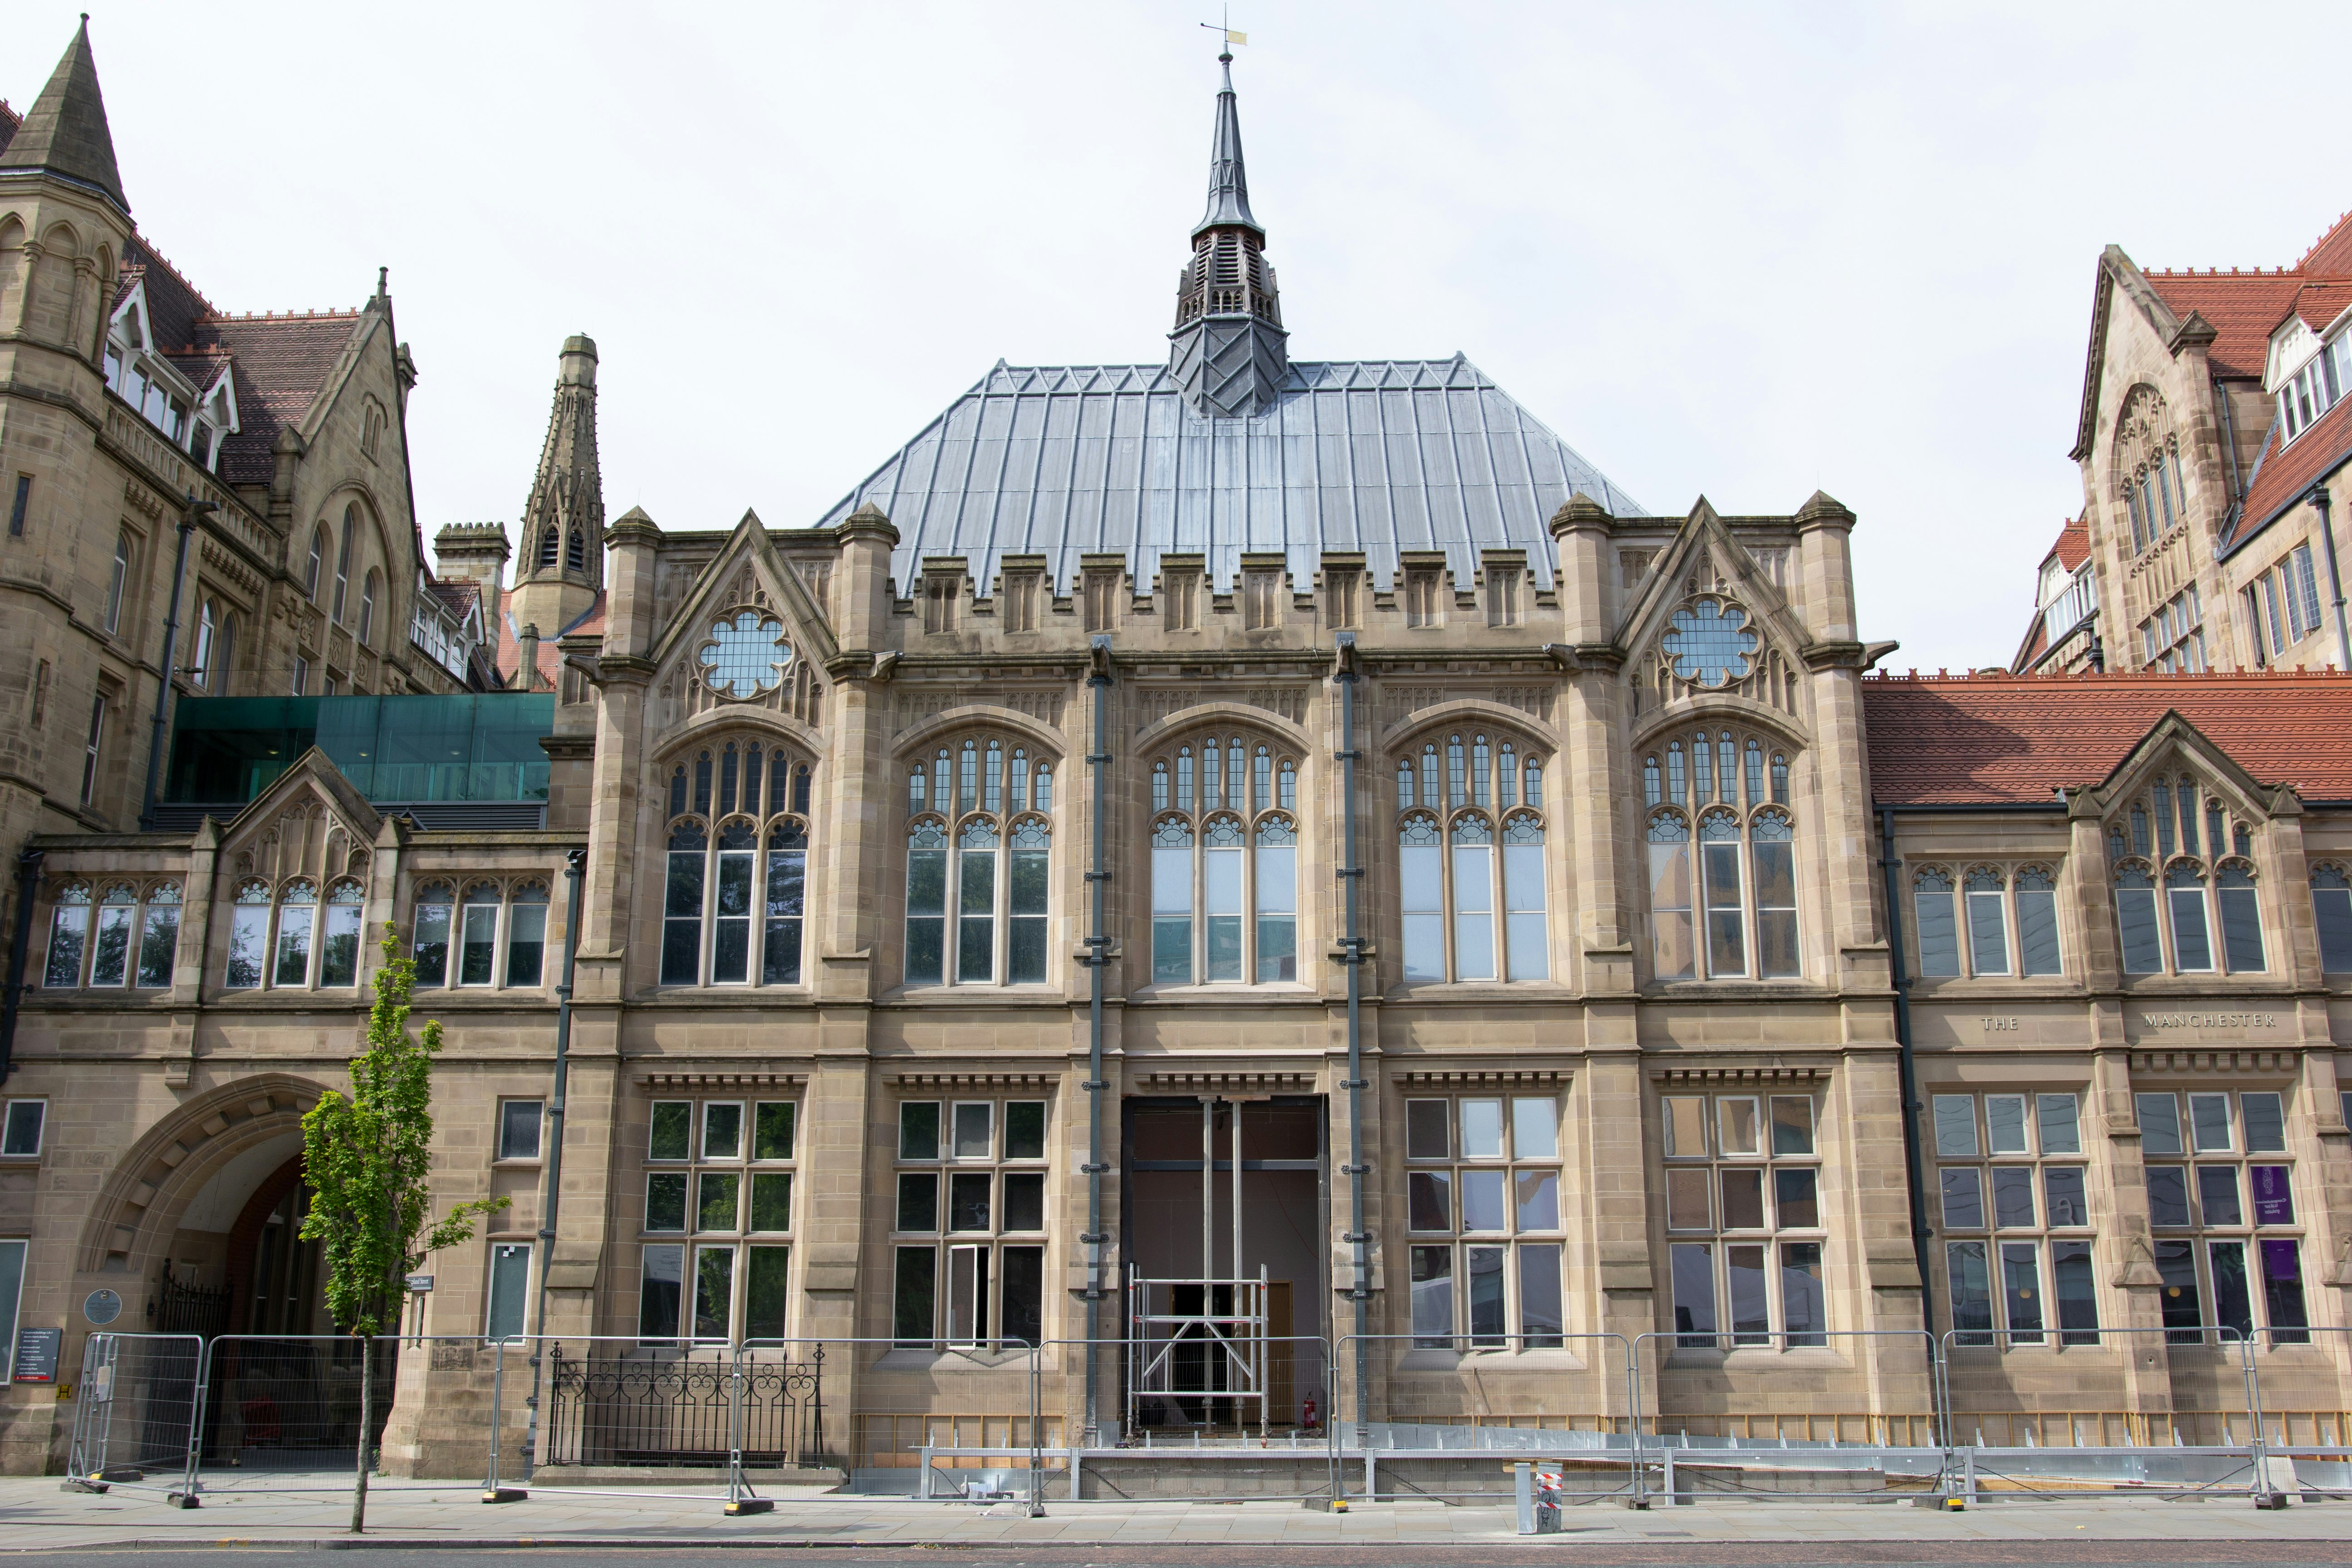 The new entrance of the Manchester Museum, a historic Victorian-style building. 